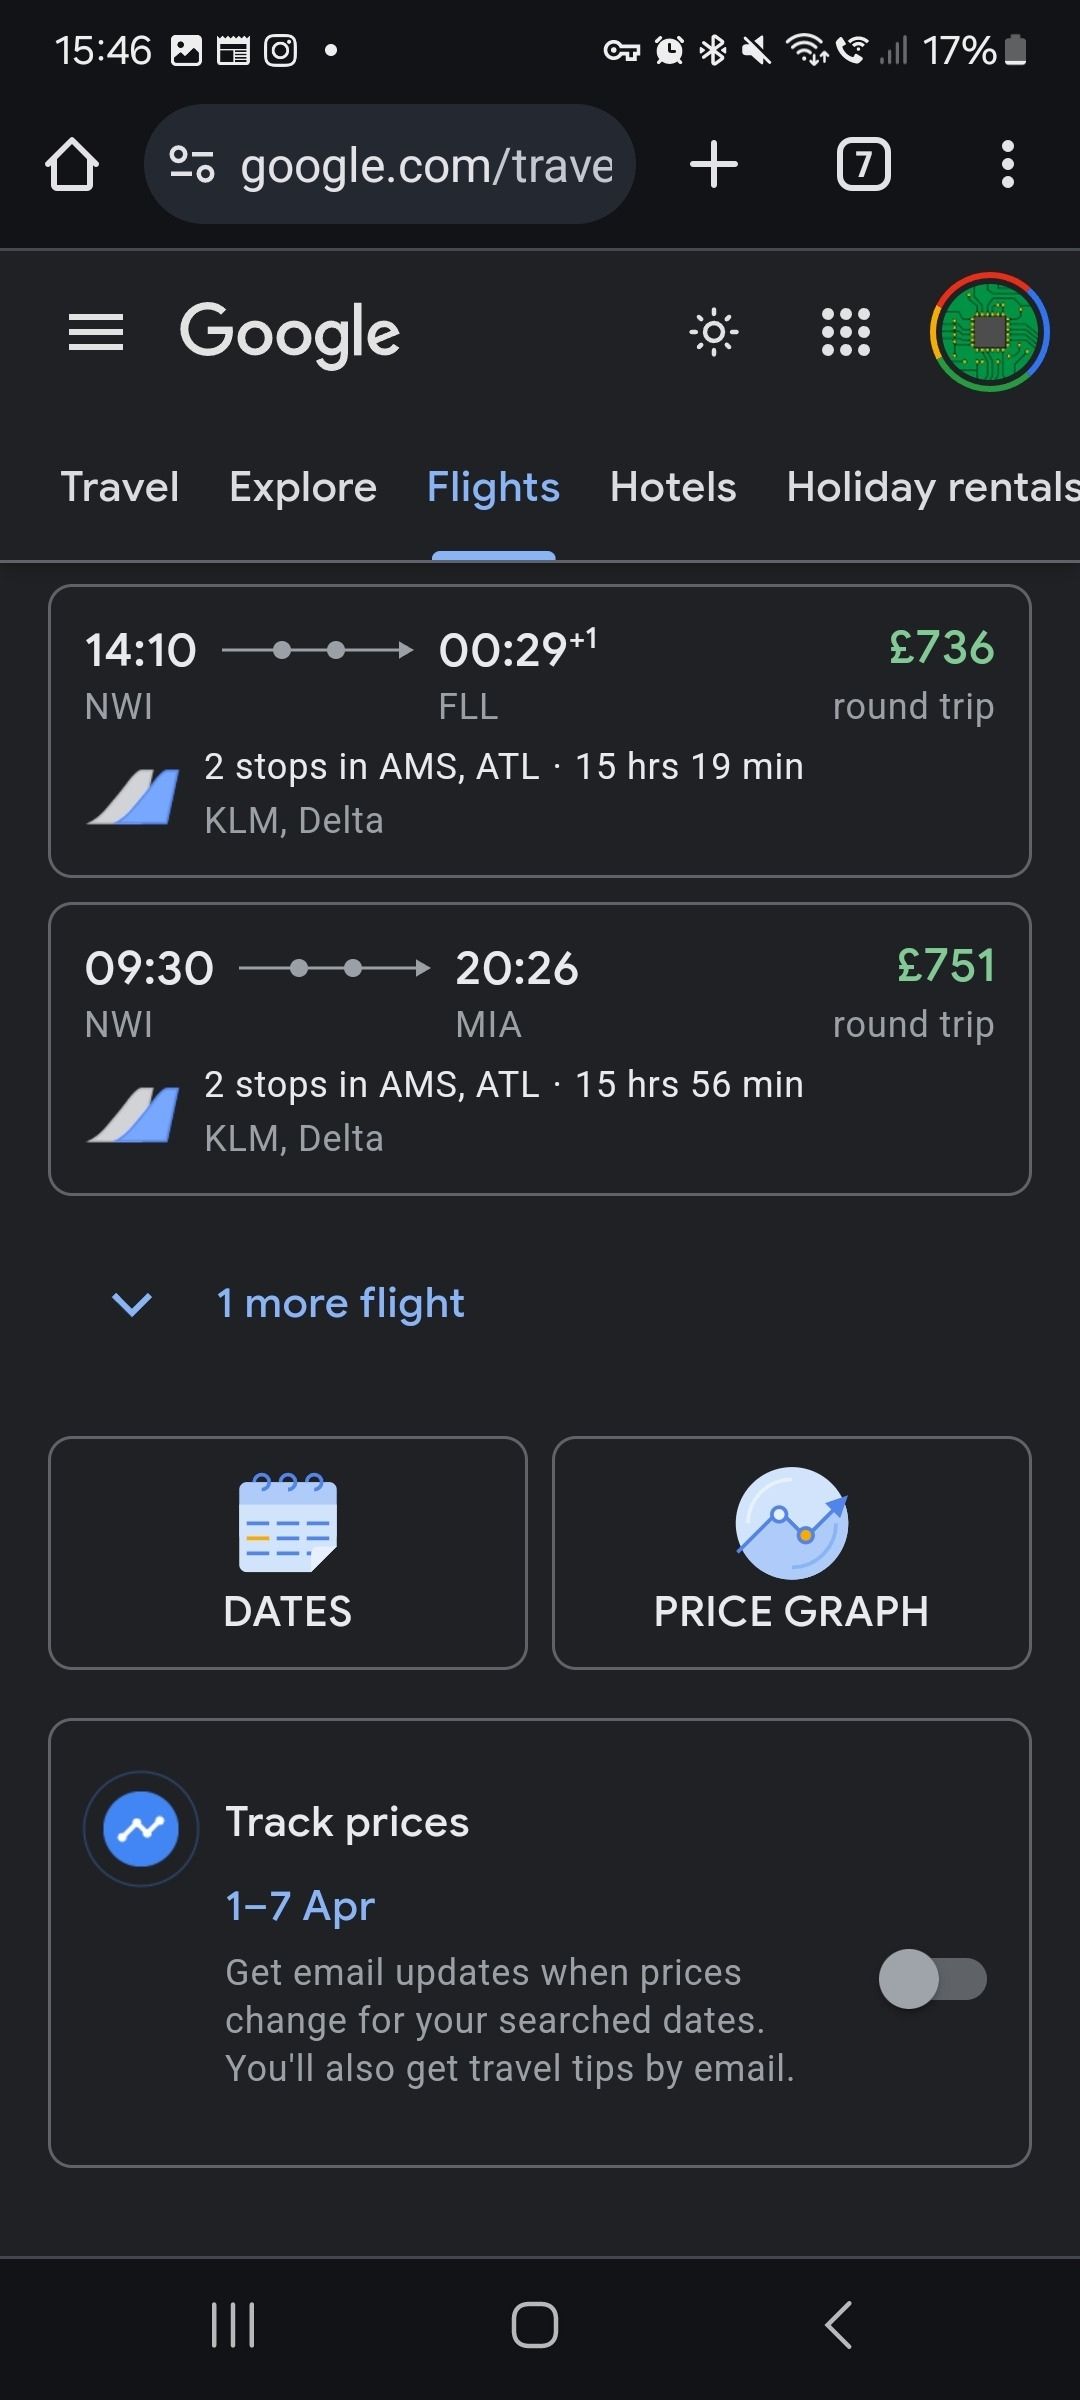 Google explore flight selctions with the dates and price graphs options